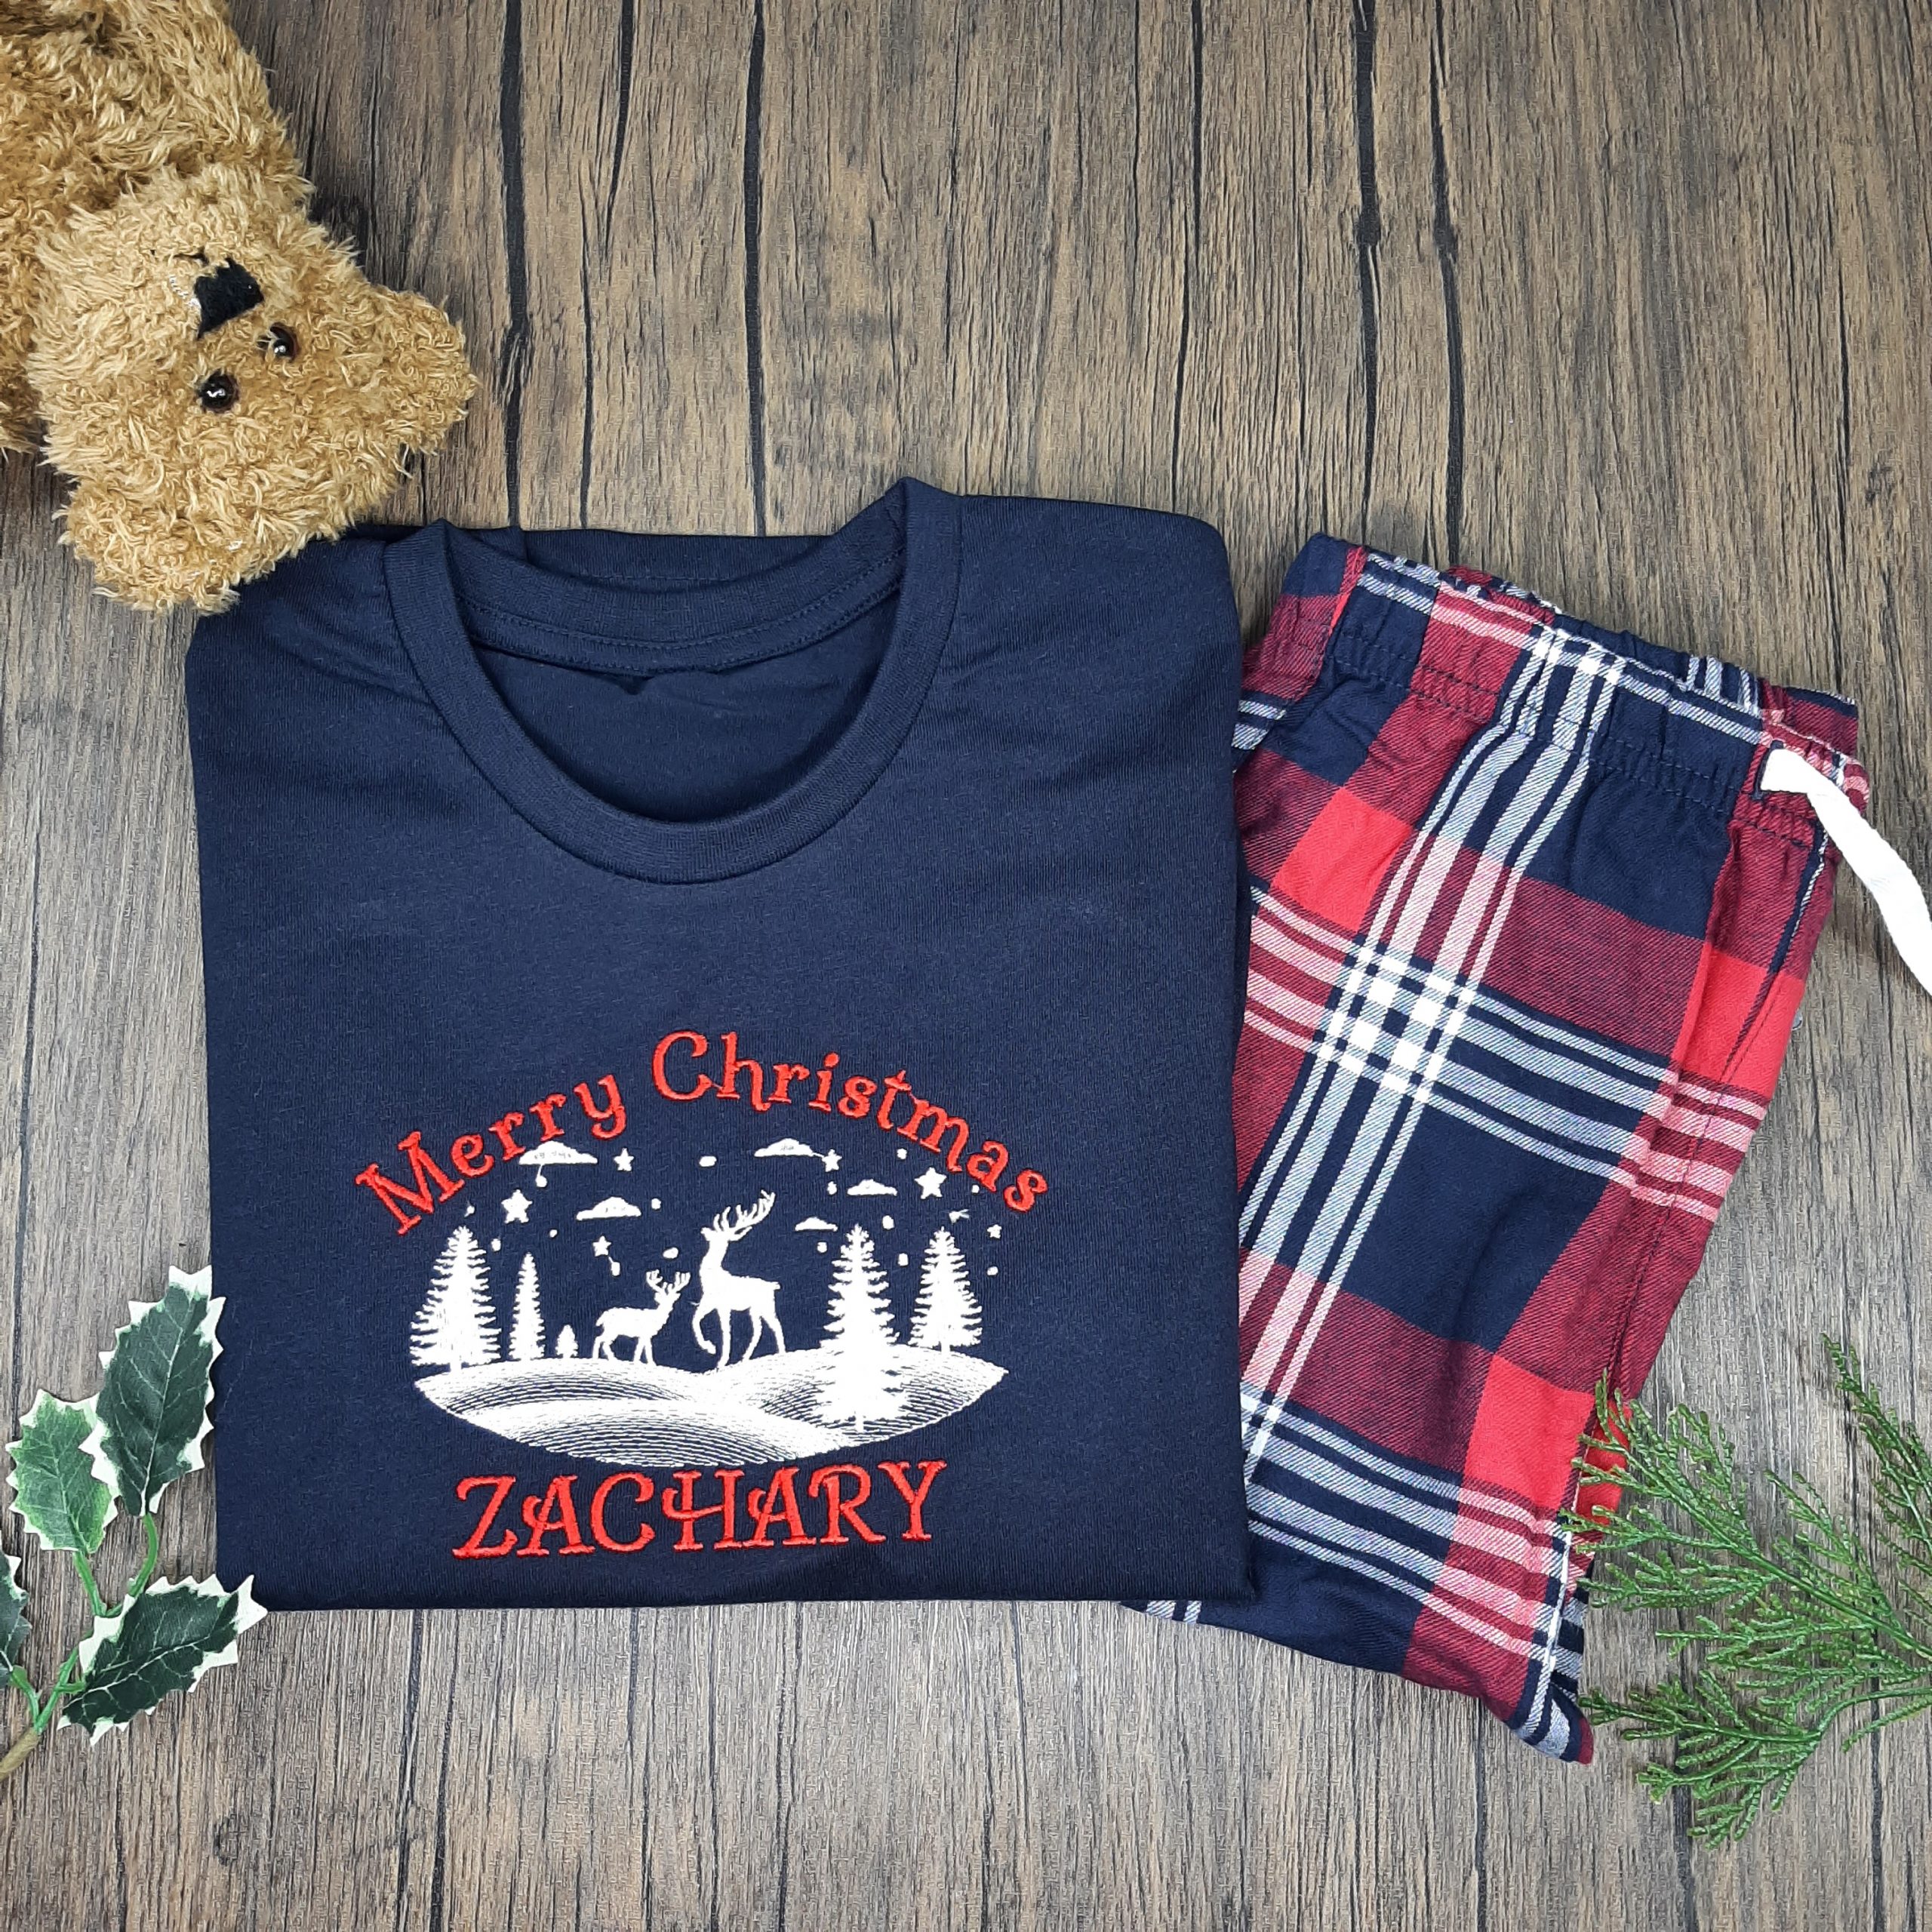 Family Tartan Winter PJs children's tarten winter pjs are great pyjamas for christmas. Featuring reindeer snow scene. All embroidered personalisation. Red name. Laid with teddy